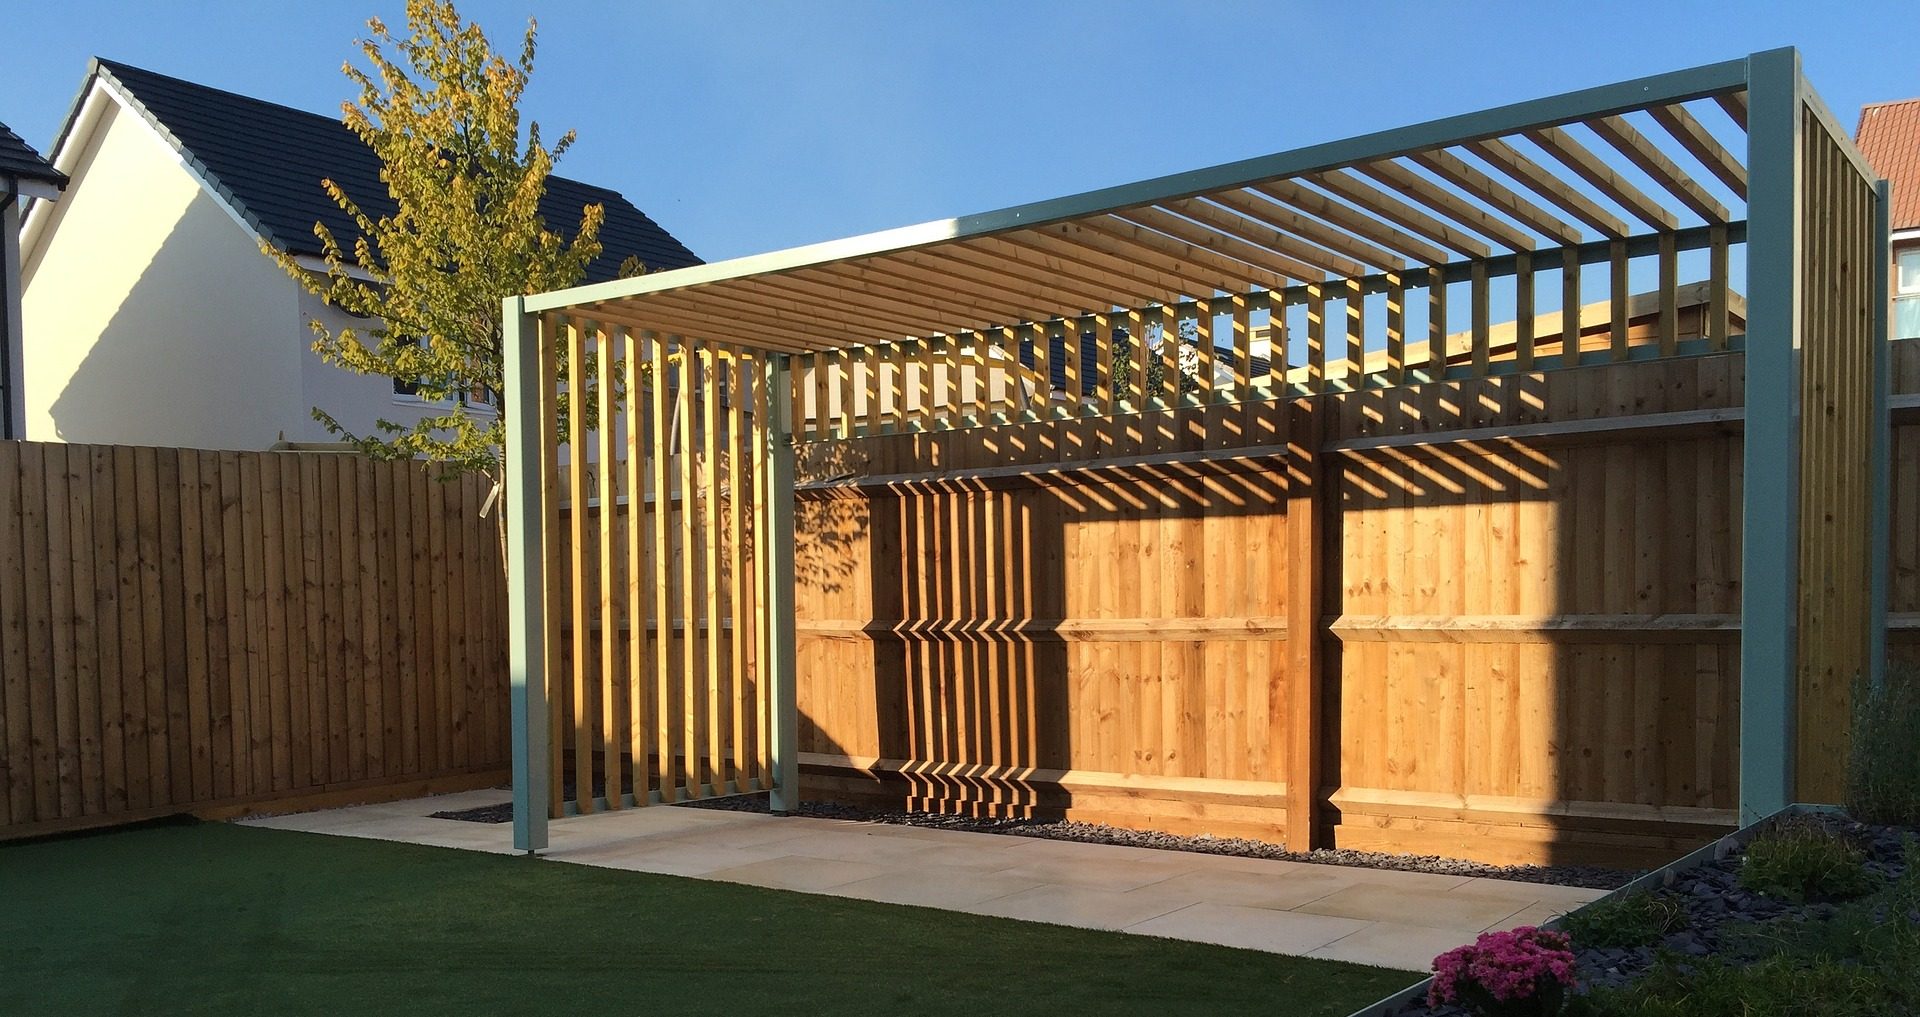 6 Green Ideas for Your Metal Pergola: Enhance Your Home's Sustainability with These Canopy Designs